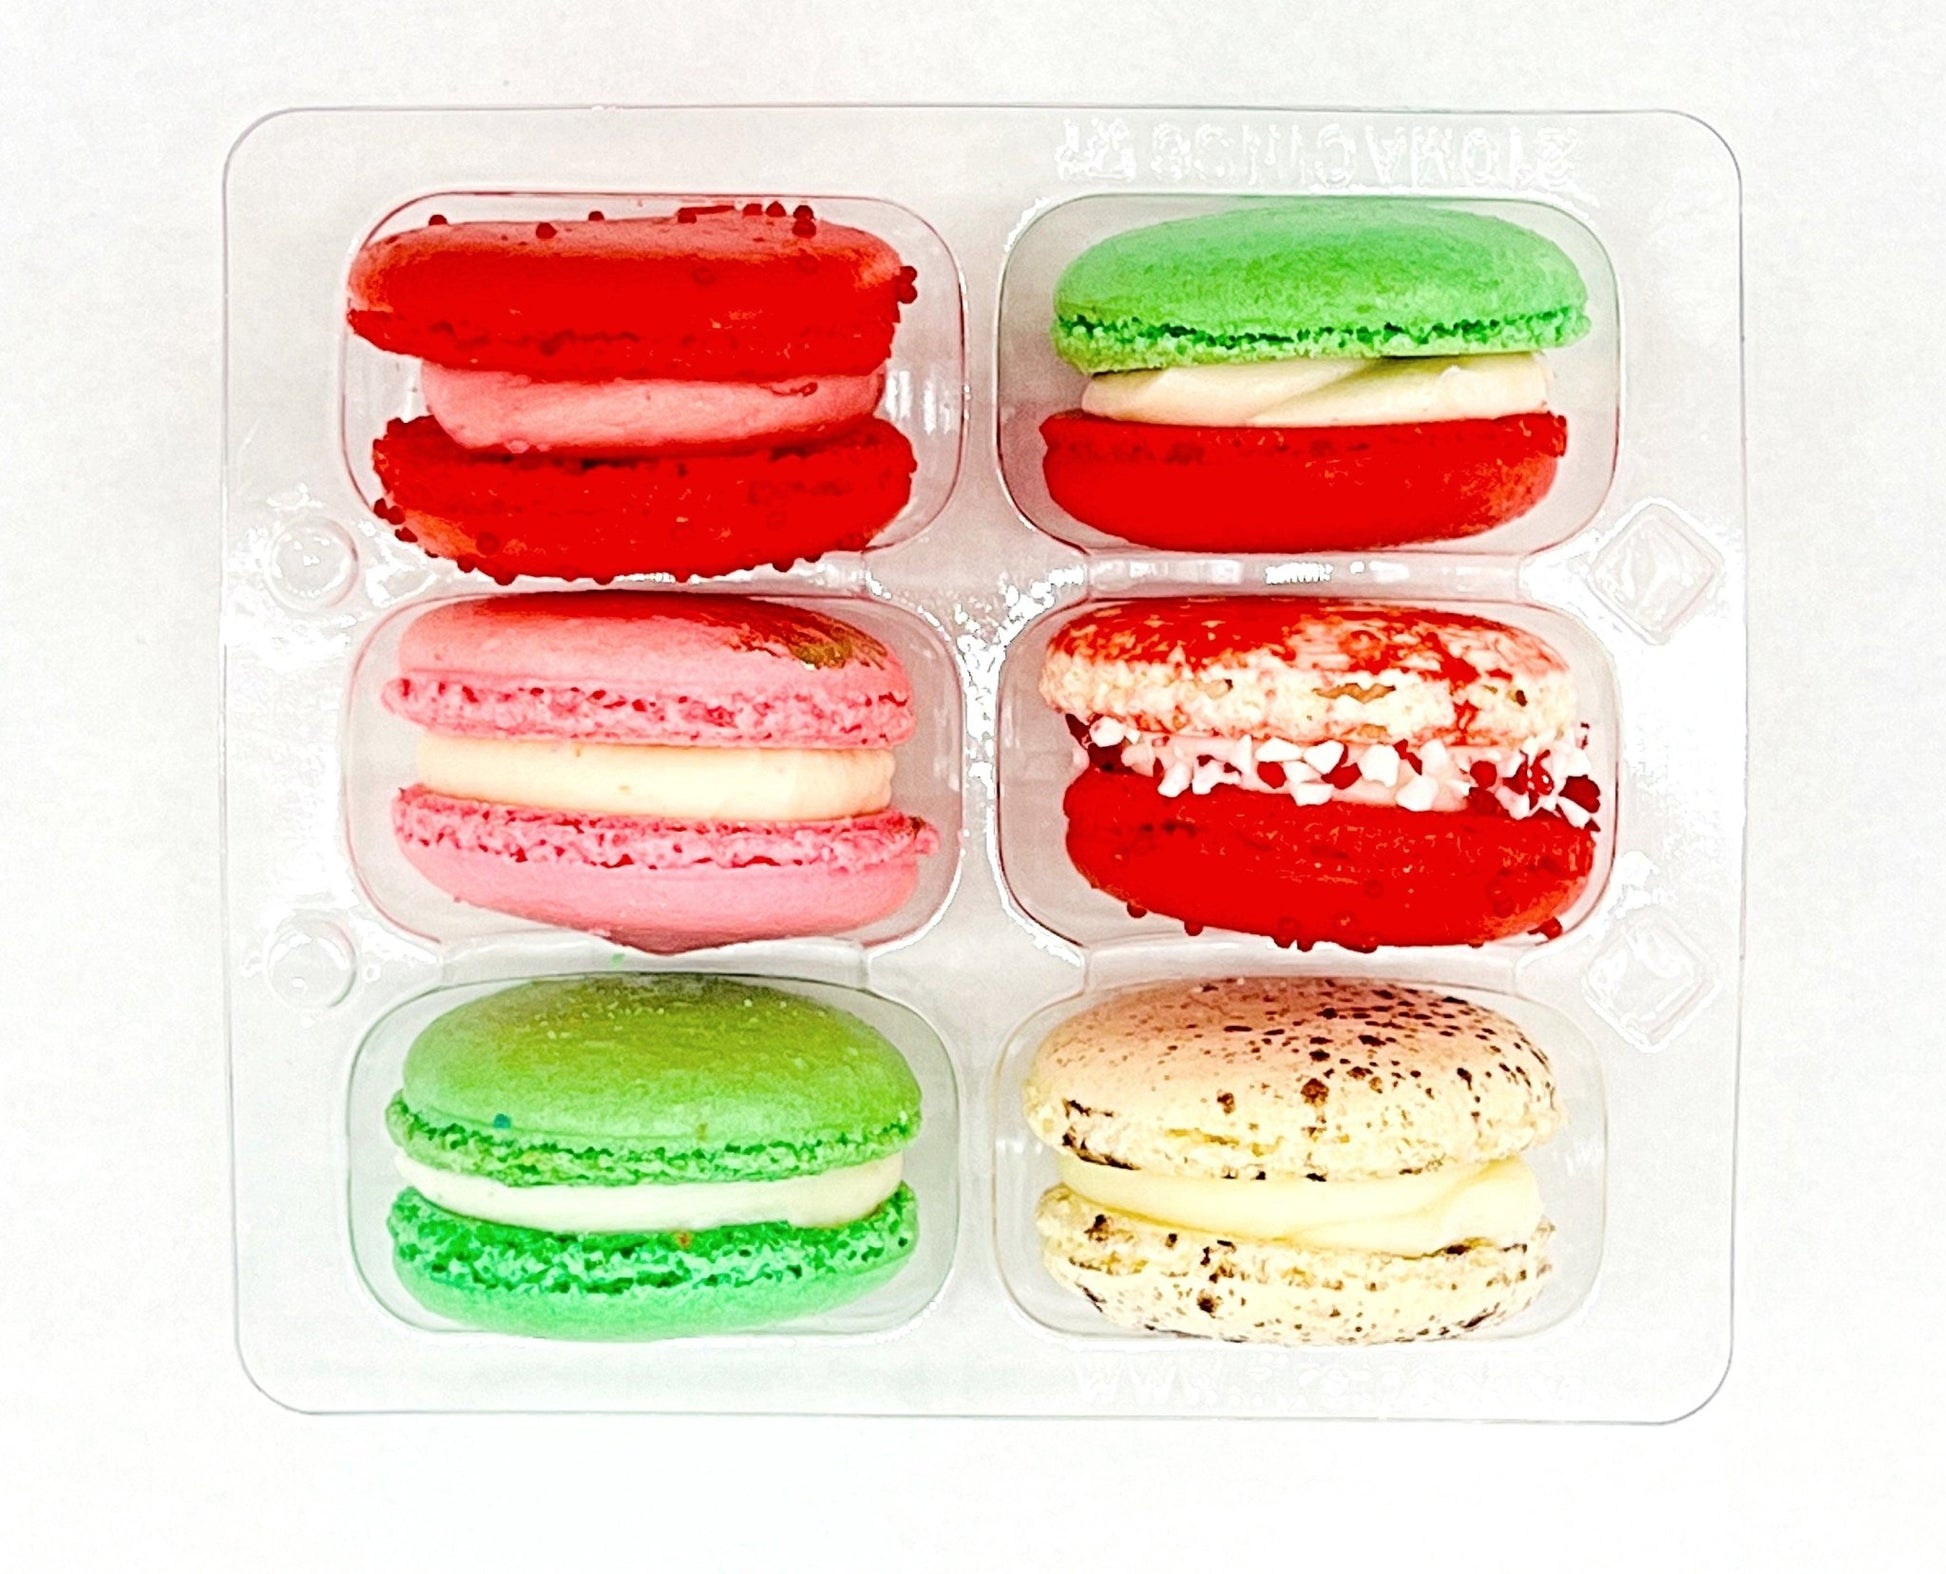 6 Pack Holiday French Macarons Set - Macaron Centrale